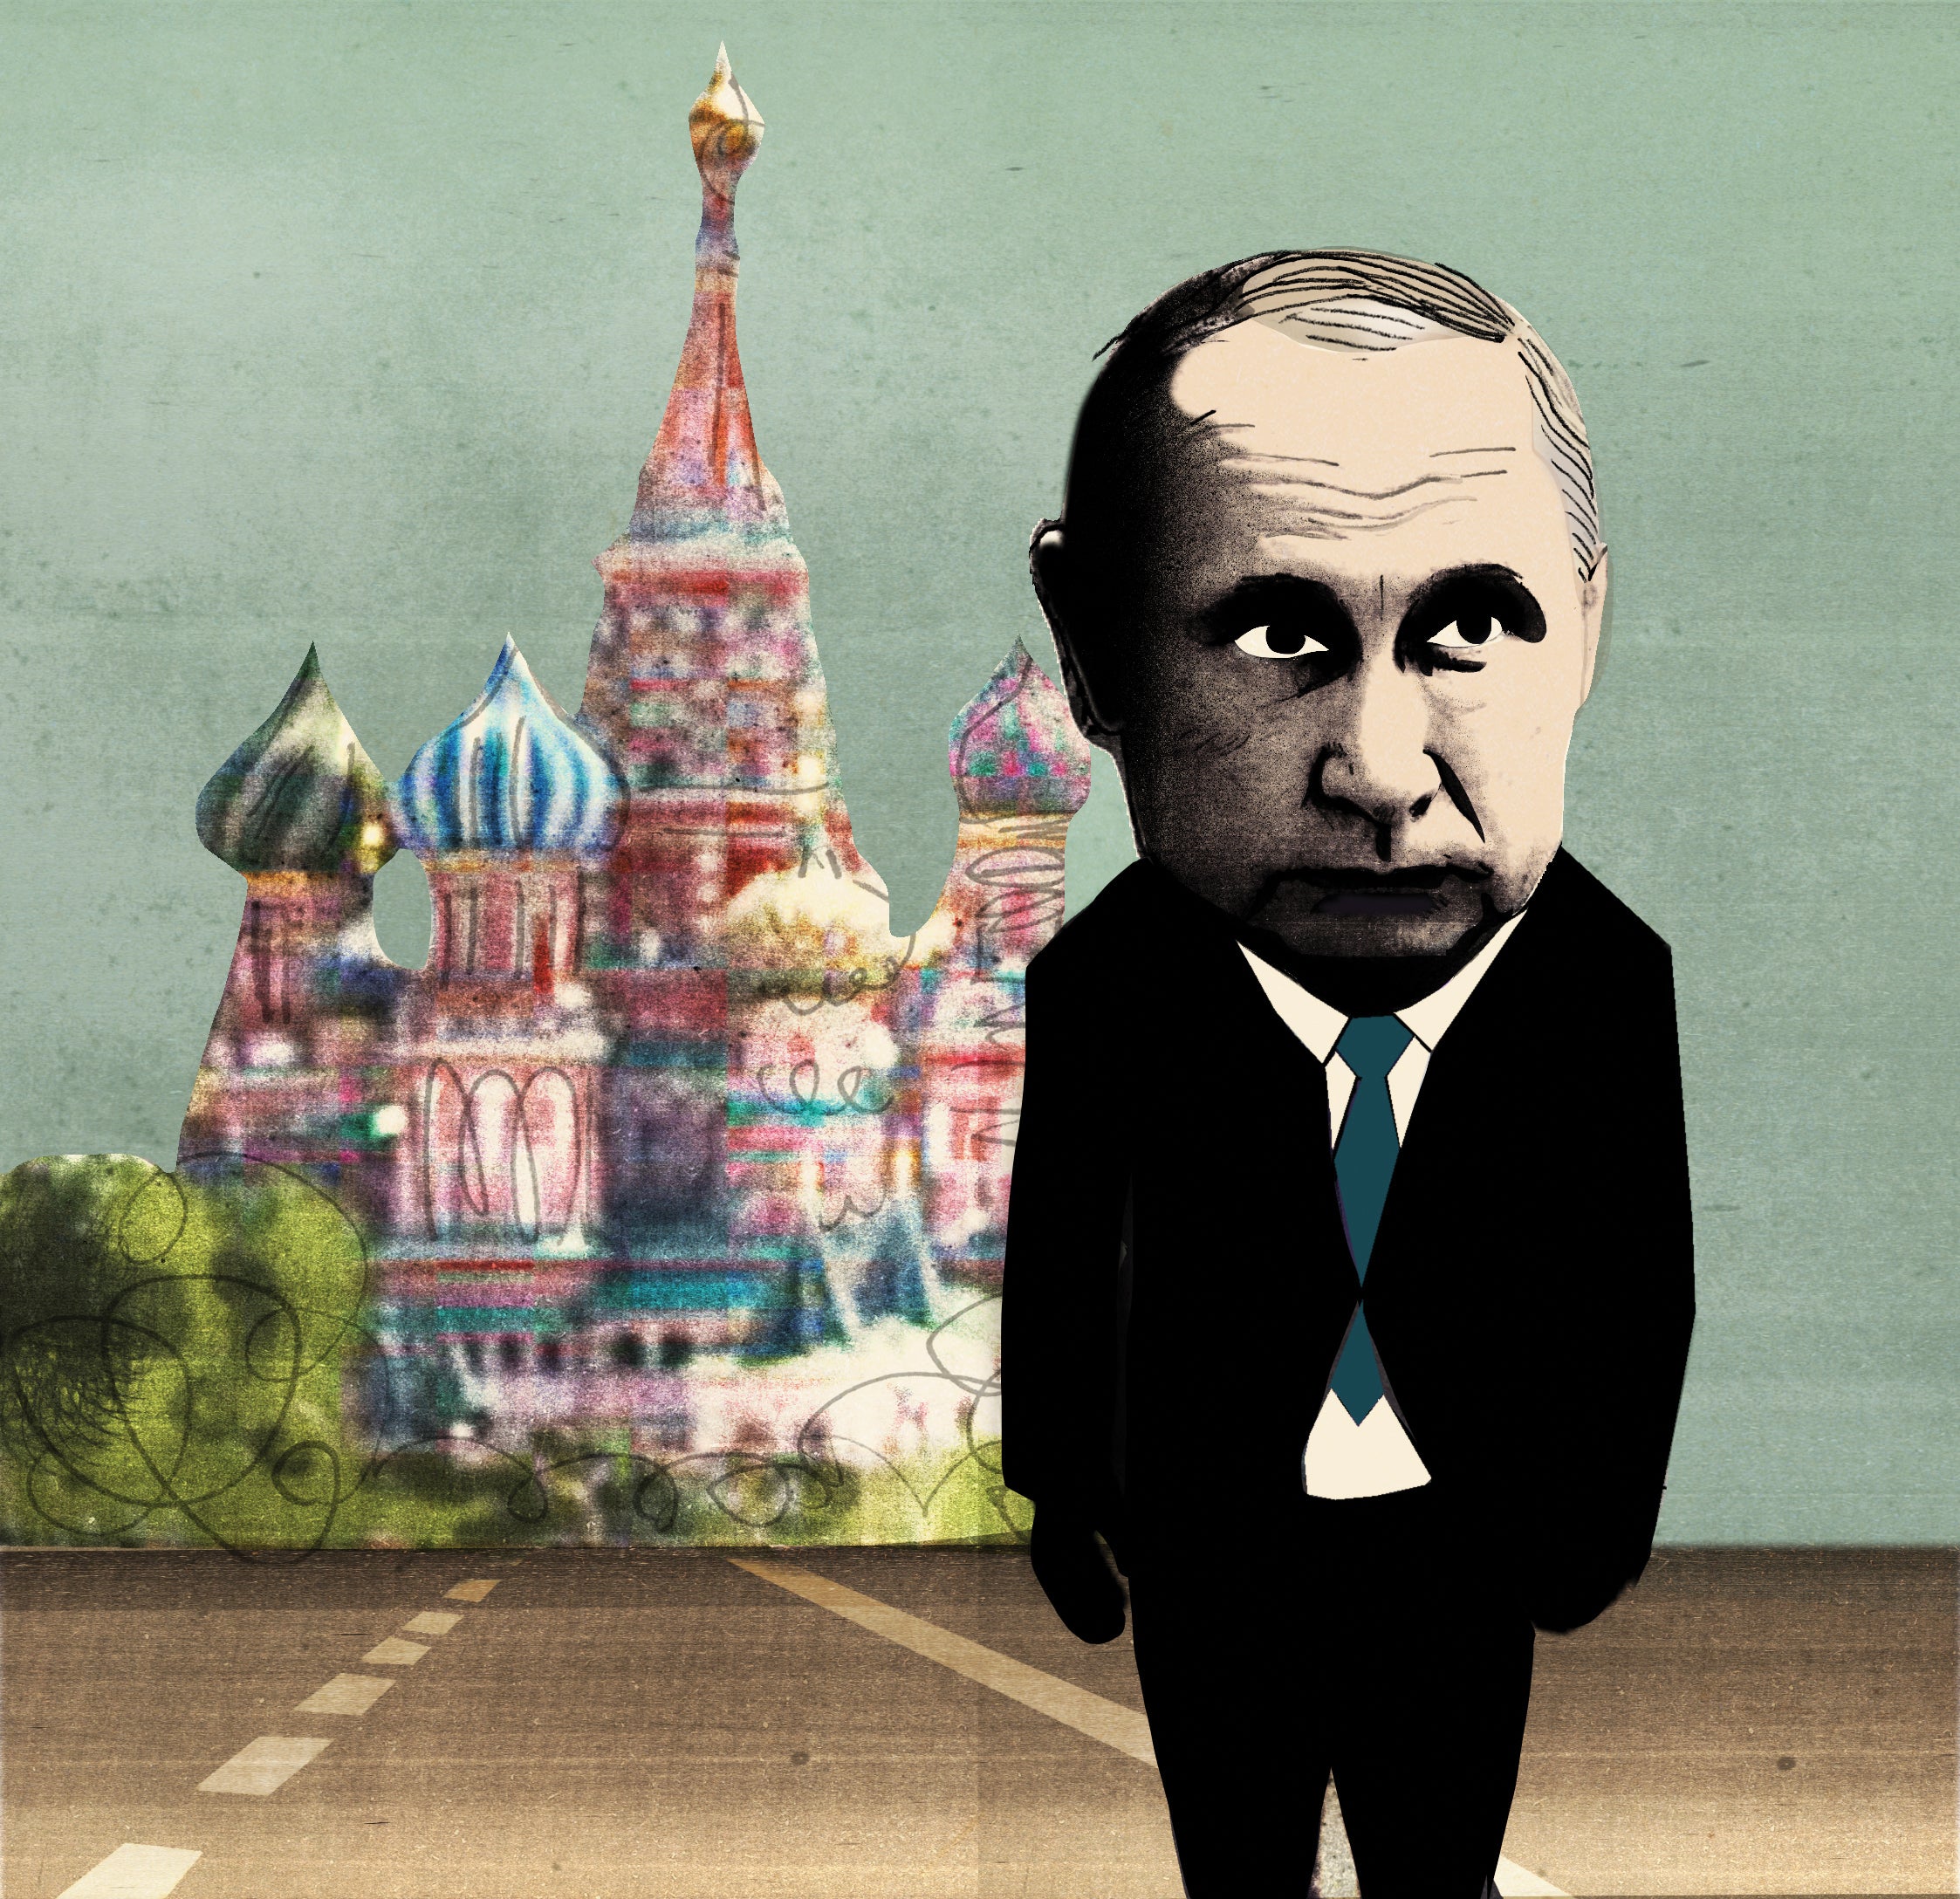 After 20 years of power, are the tides turning against Vladimir Putin?